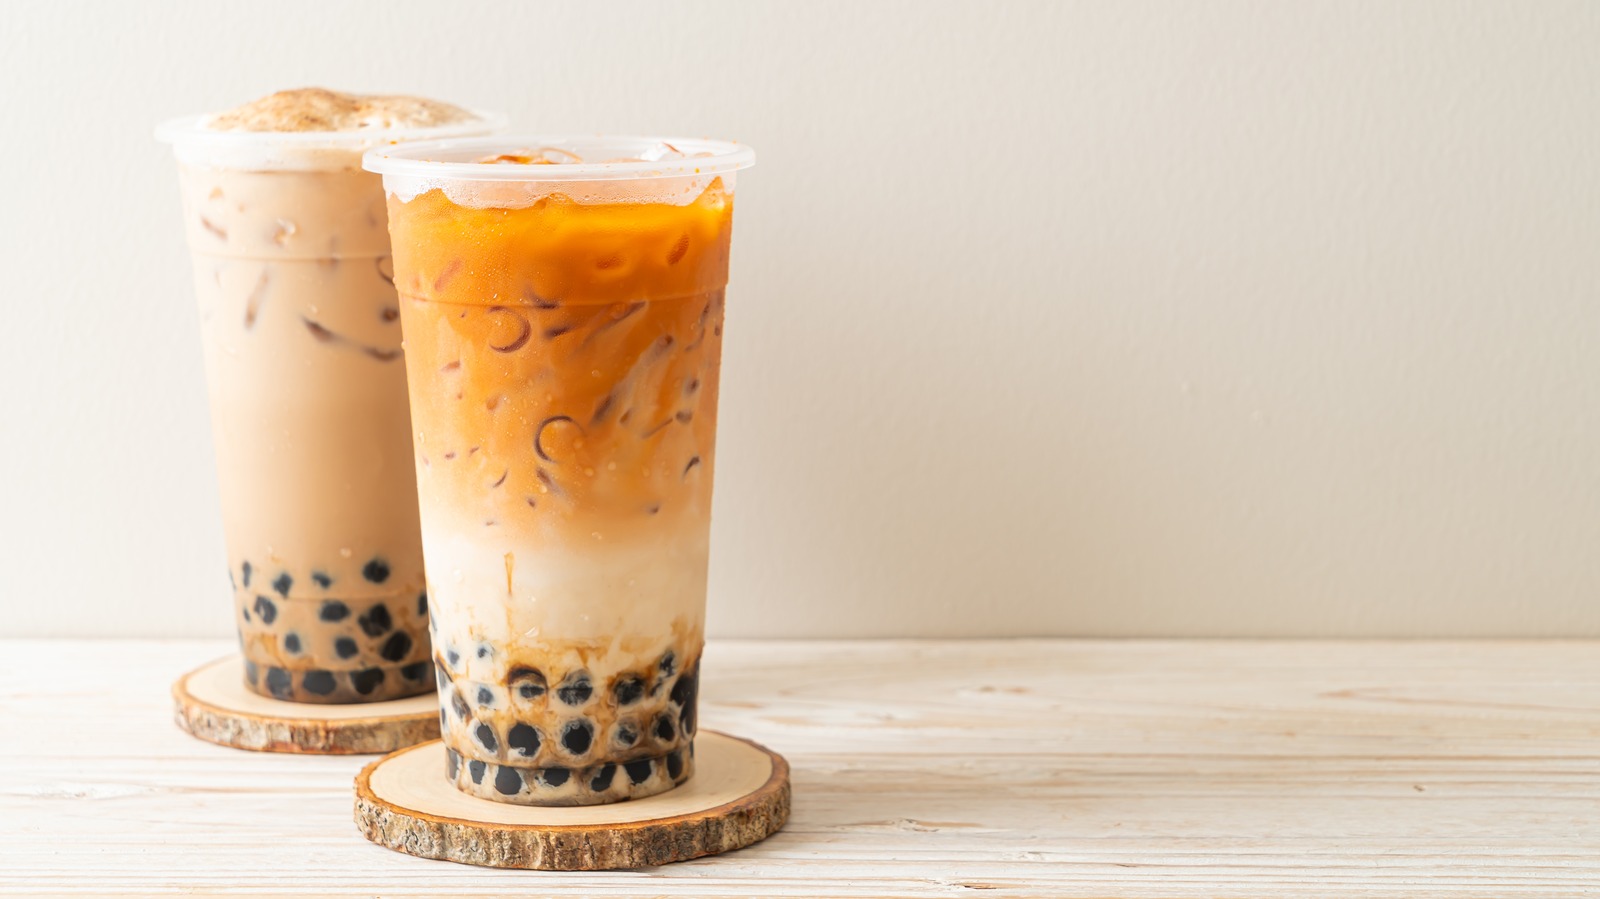 https://www.tastingtable.com/img/gallery/boba-flavors-ranked-worst-to-best/l-intro-1649268776.jpg